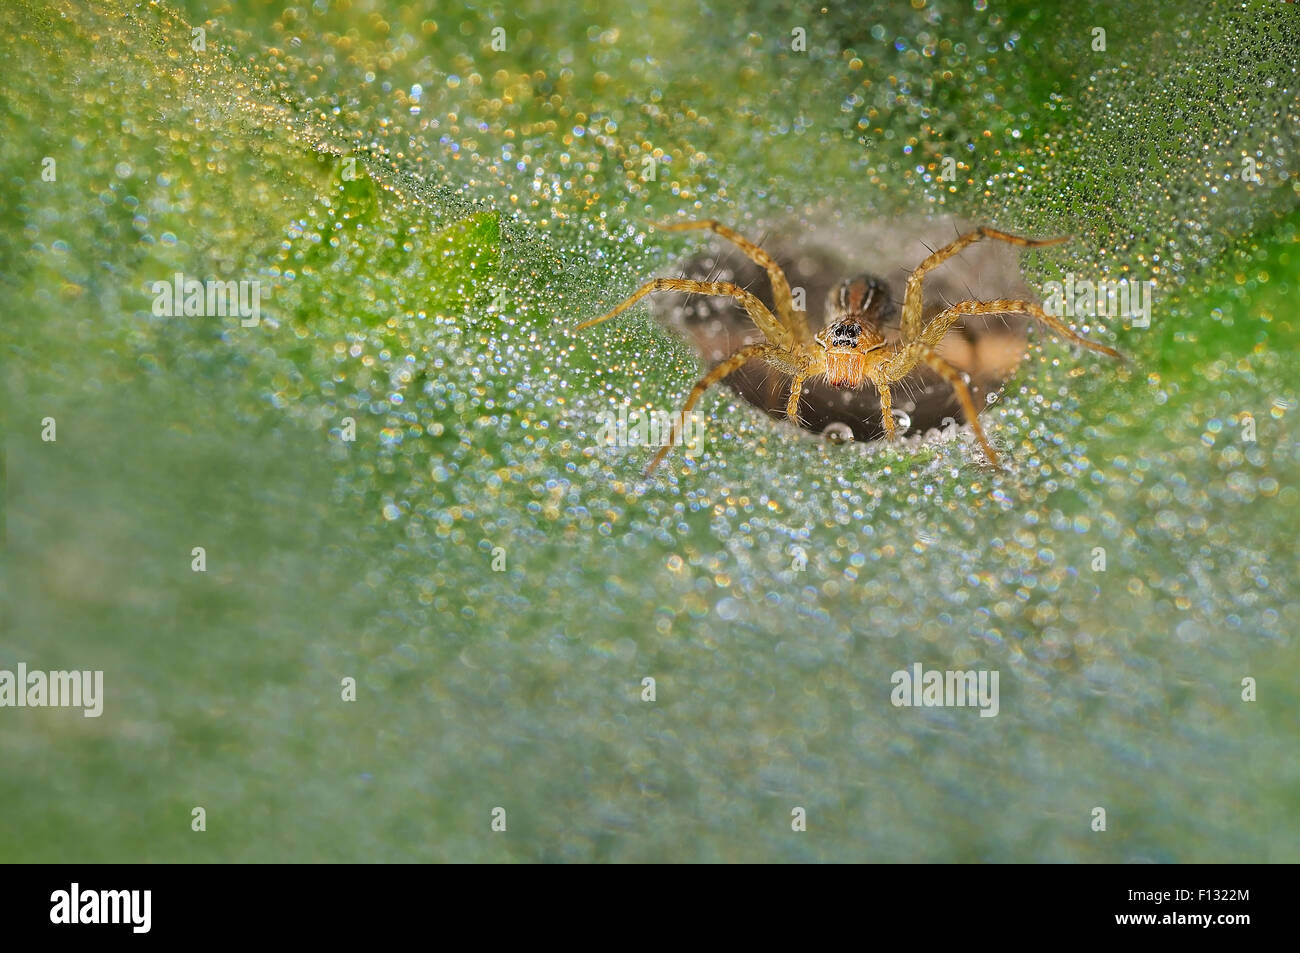 Grass Spider With Dews On Its Webs Stock Photo